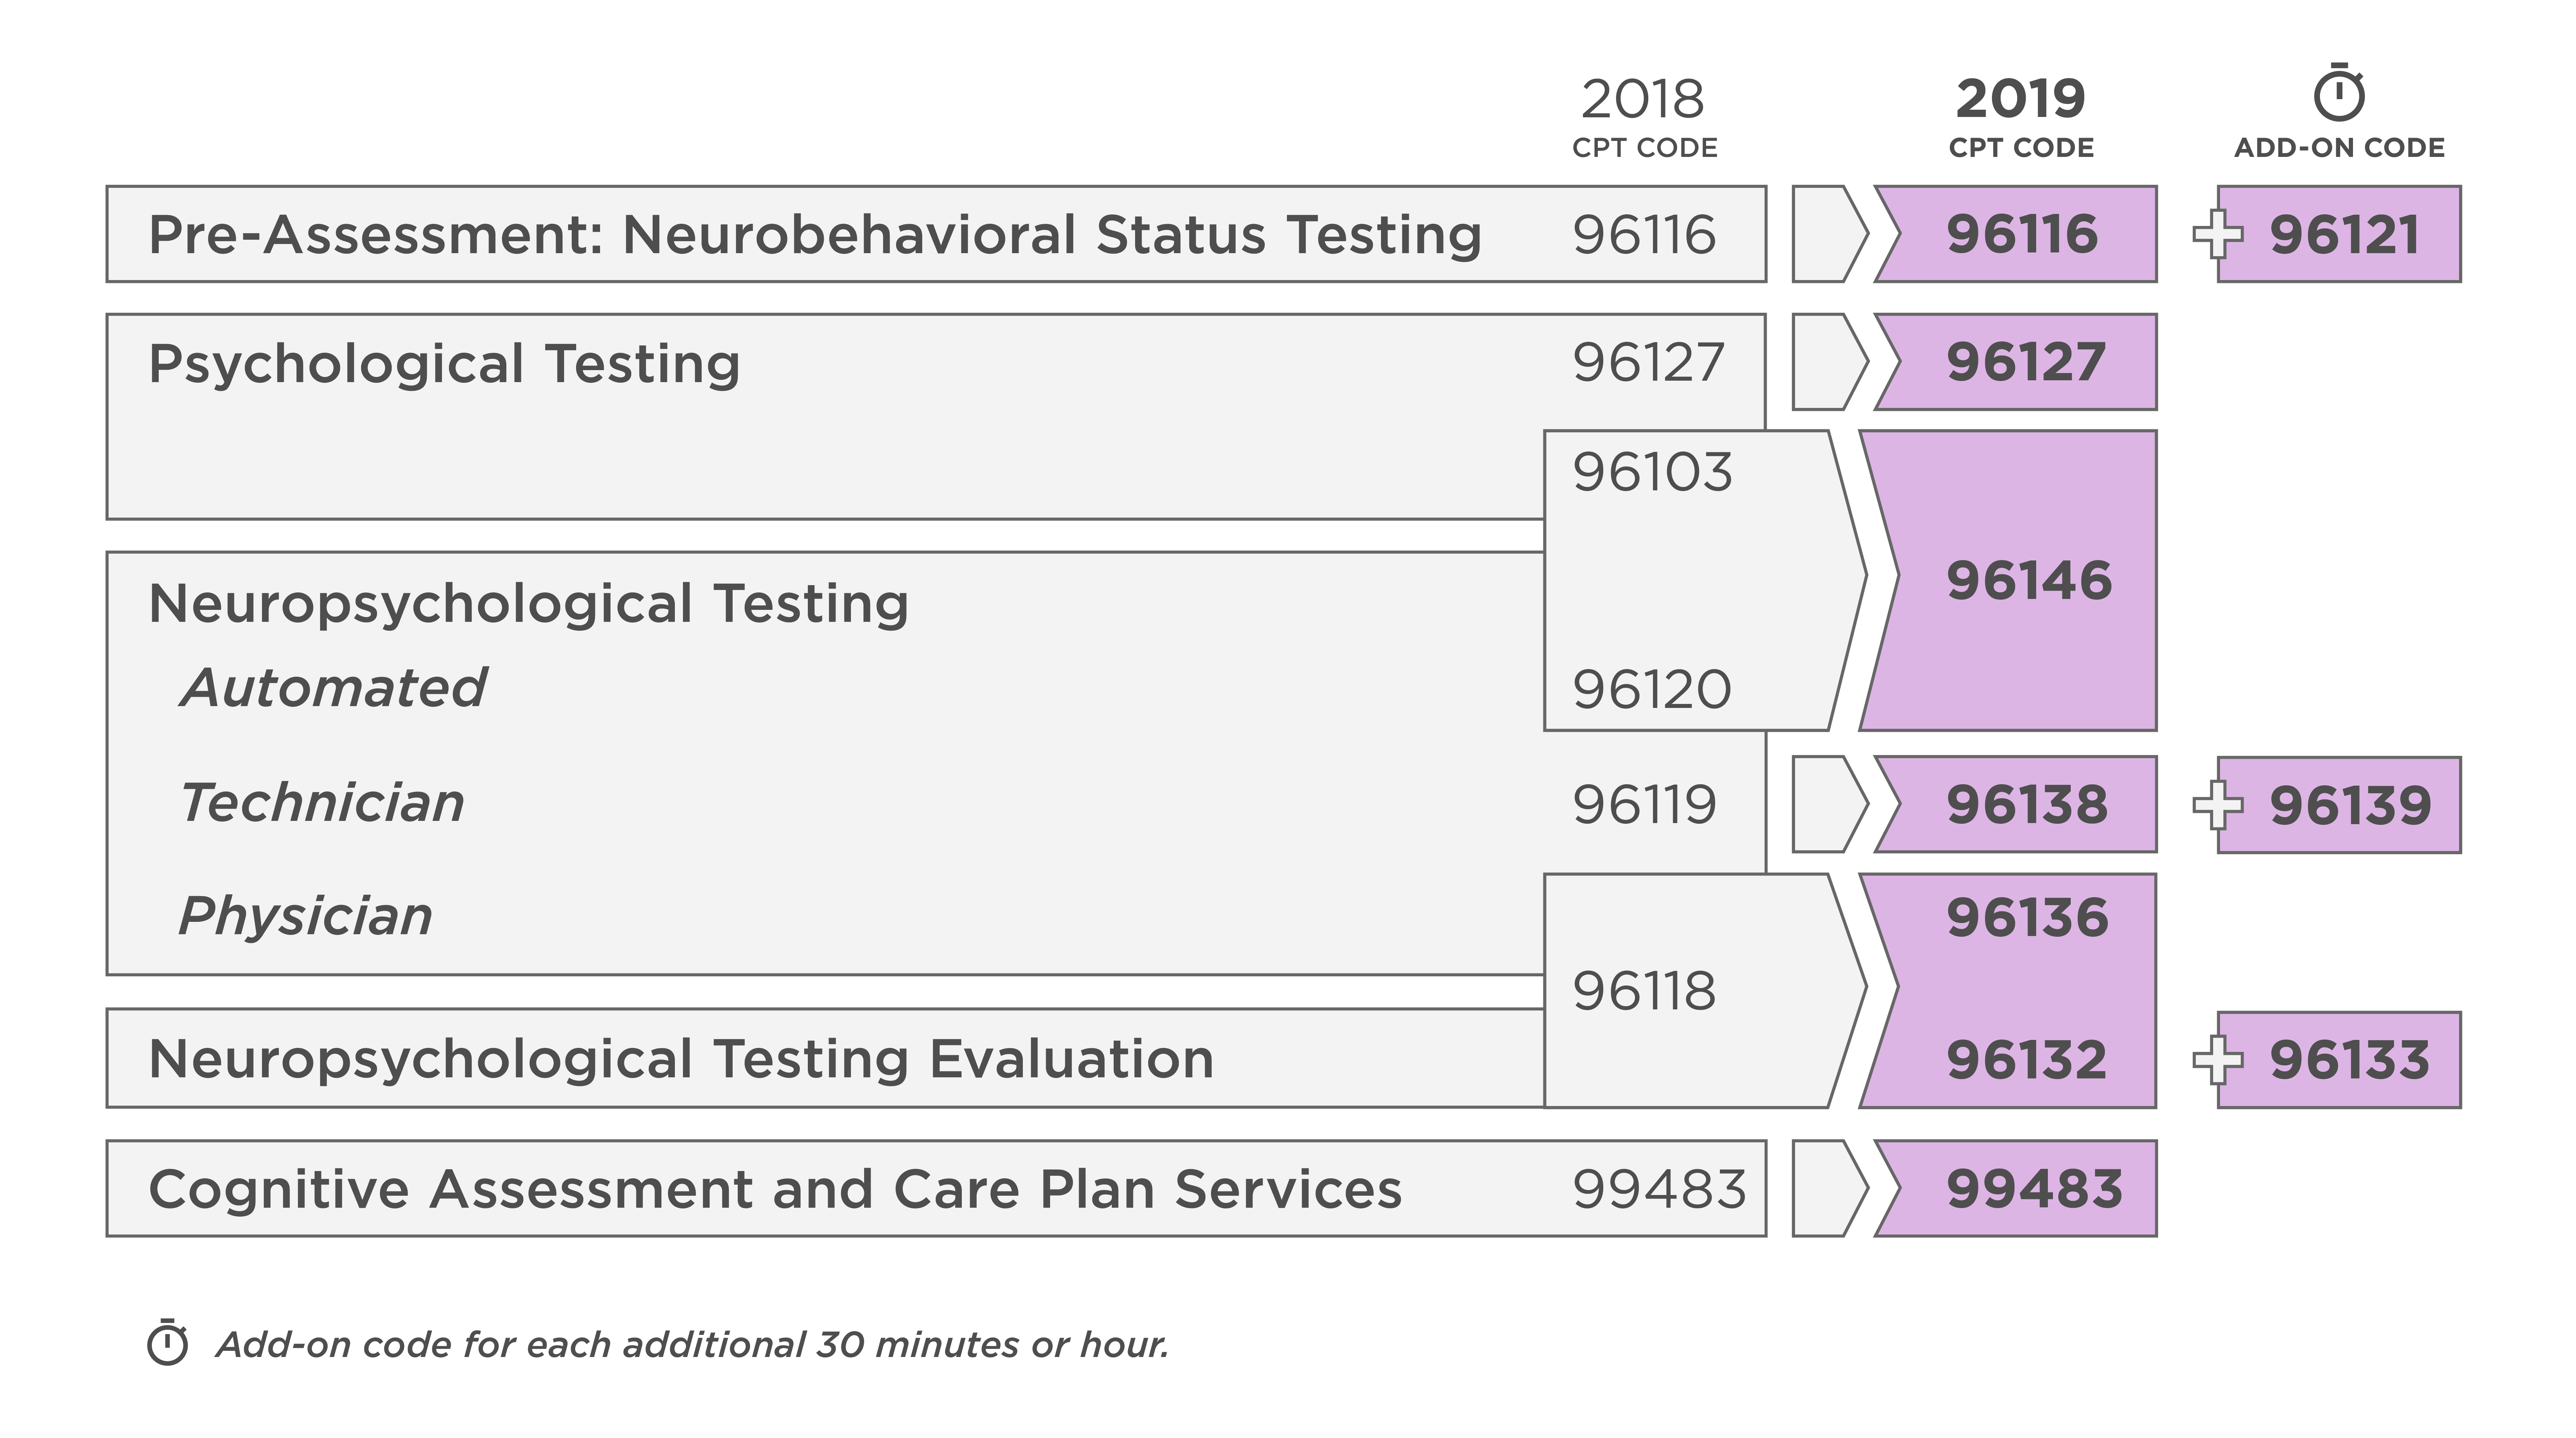 New 2019 Billing Codes for Psychological and Neuropsychological Testing